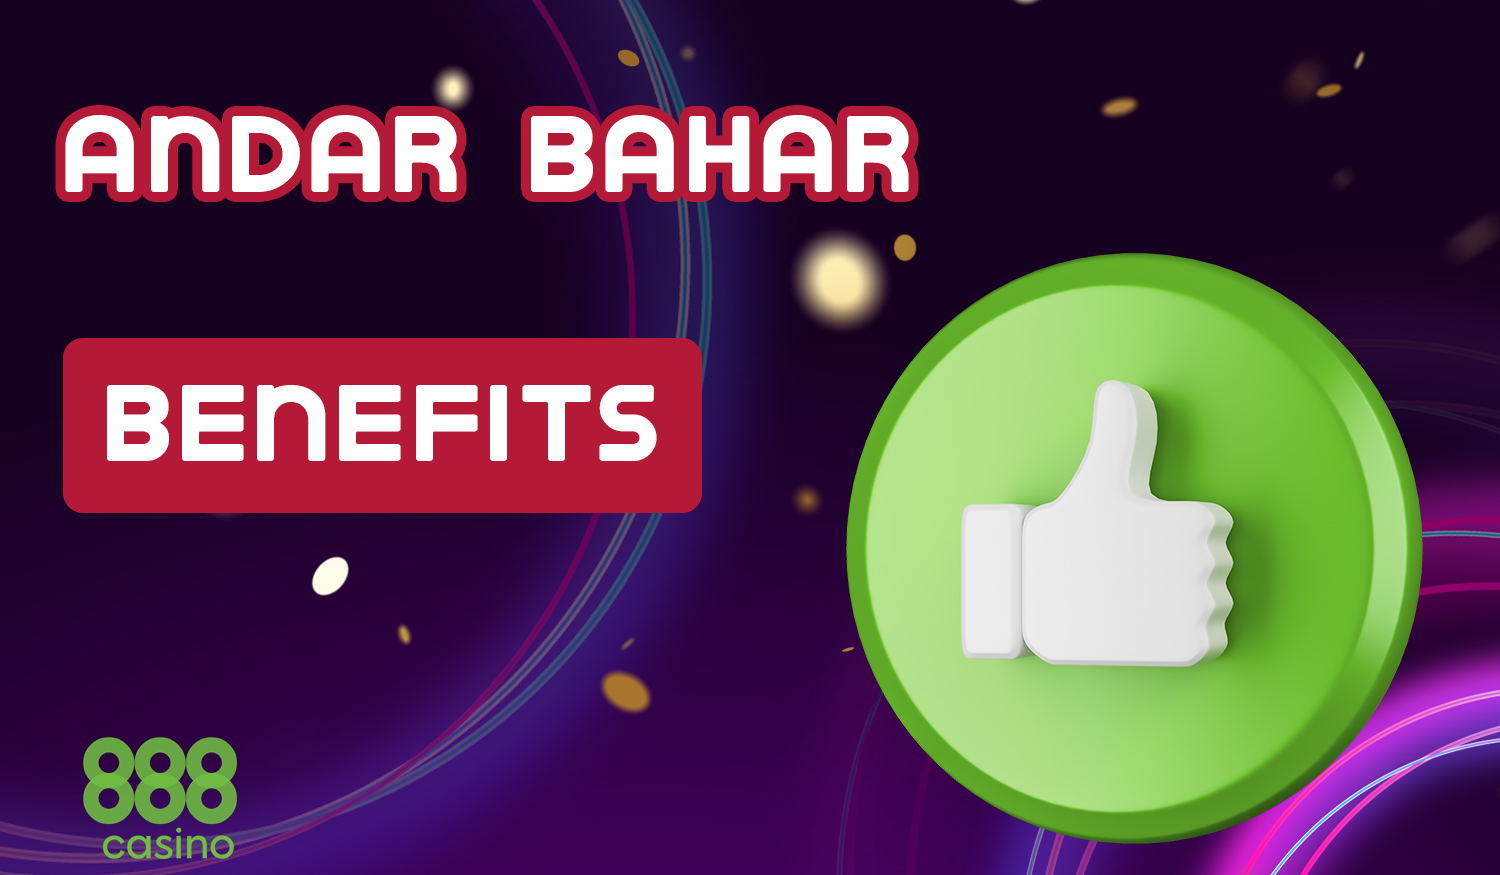 What are the benefits of 888 online casino for playing Andar bahar